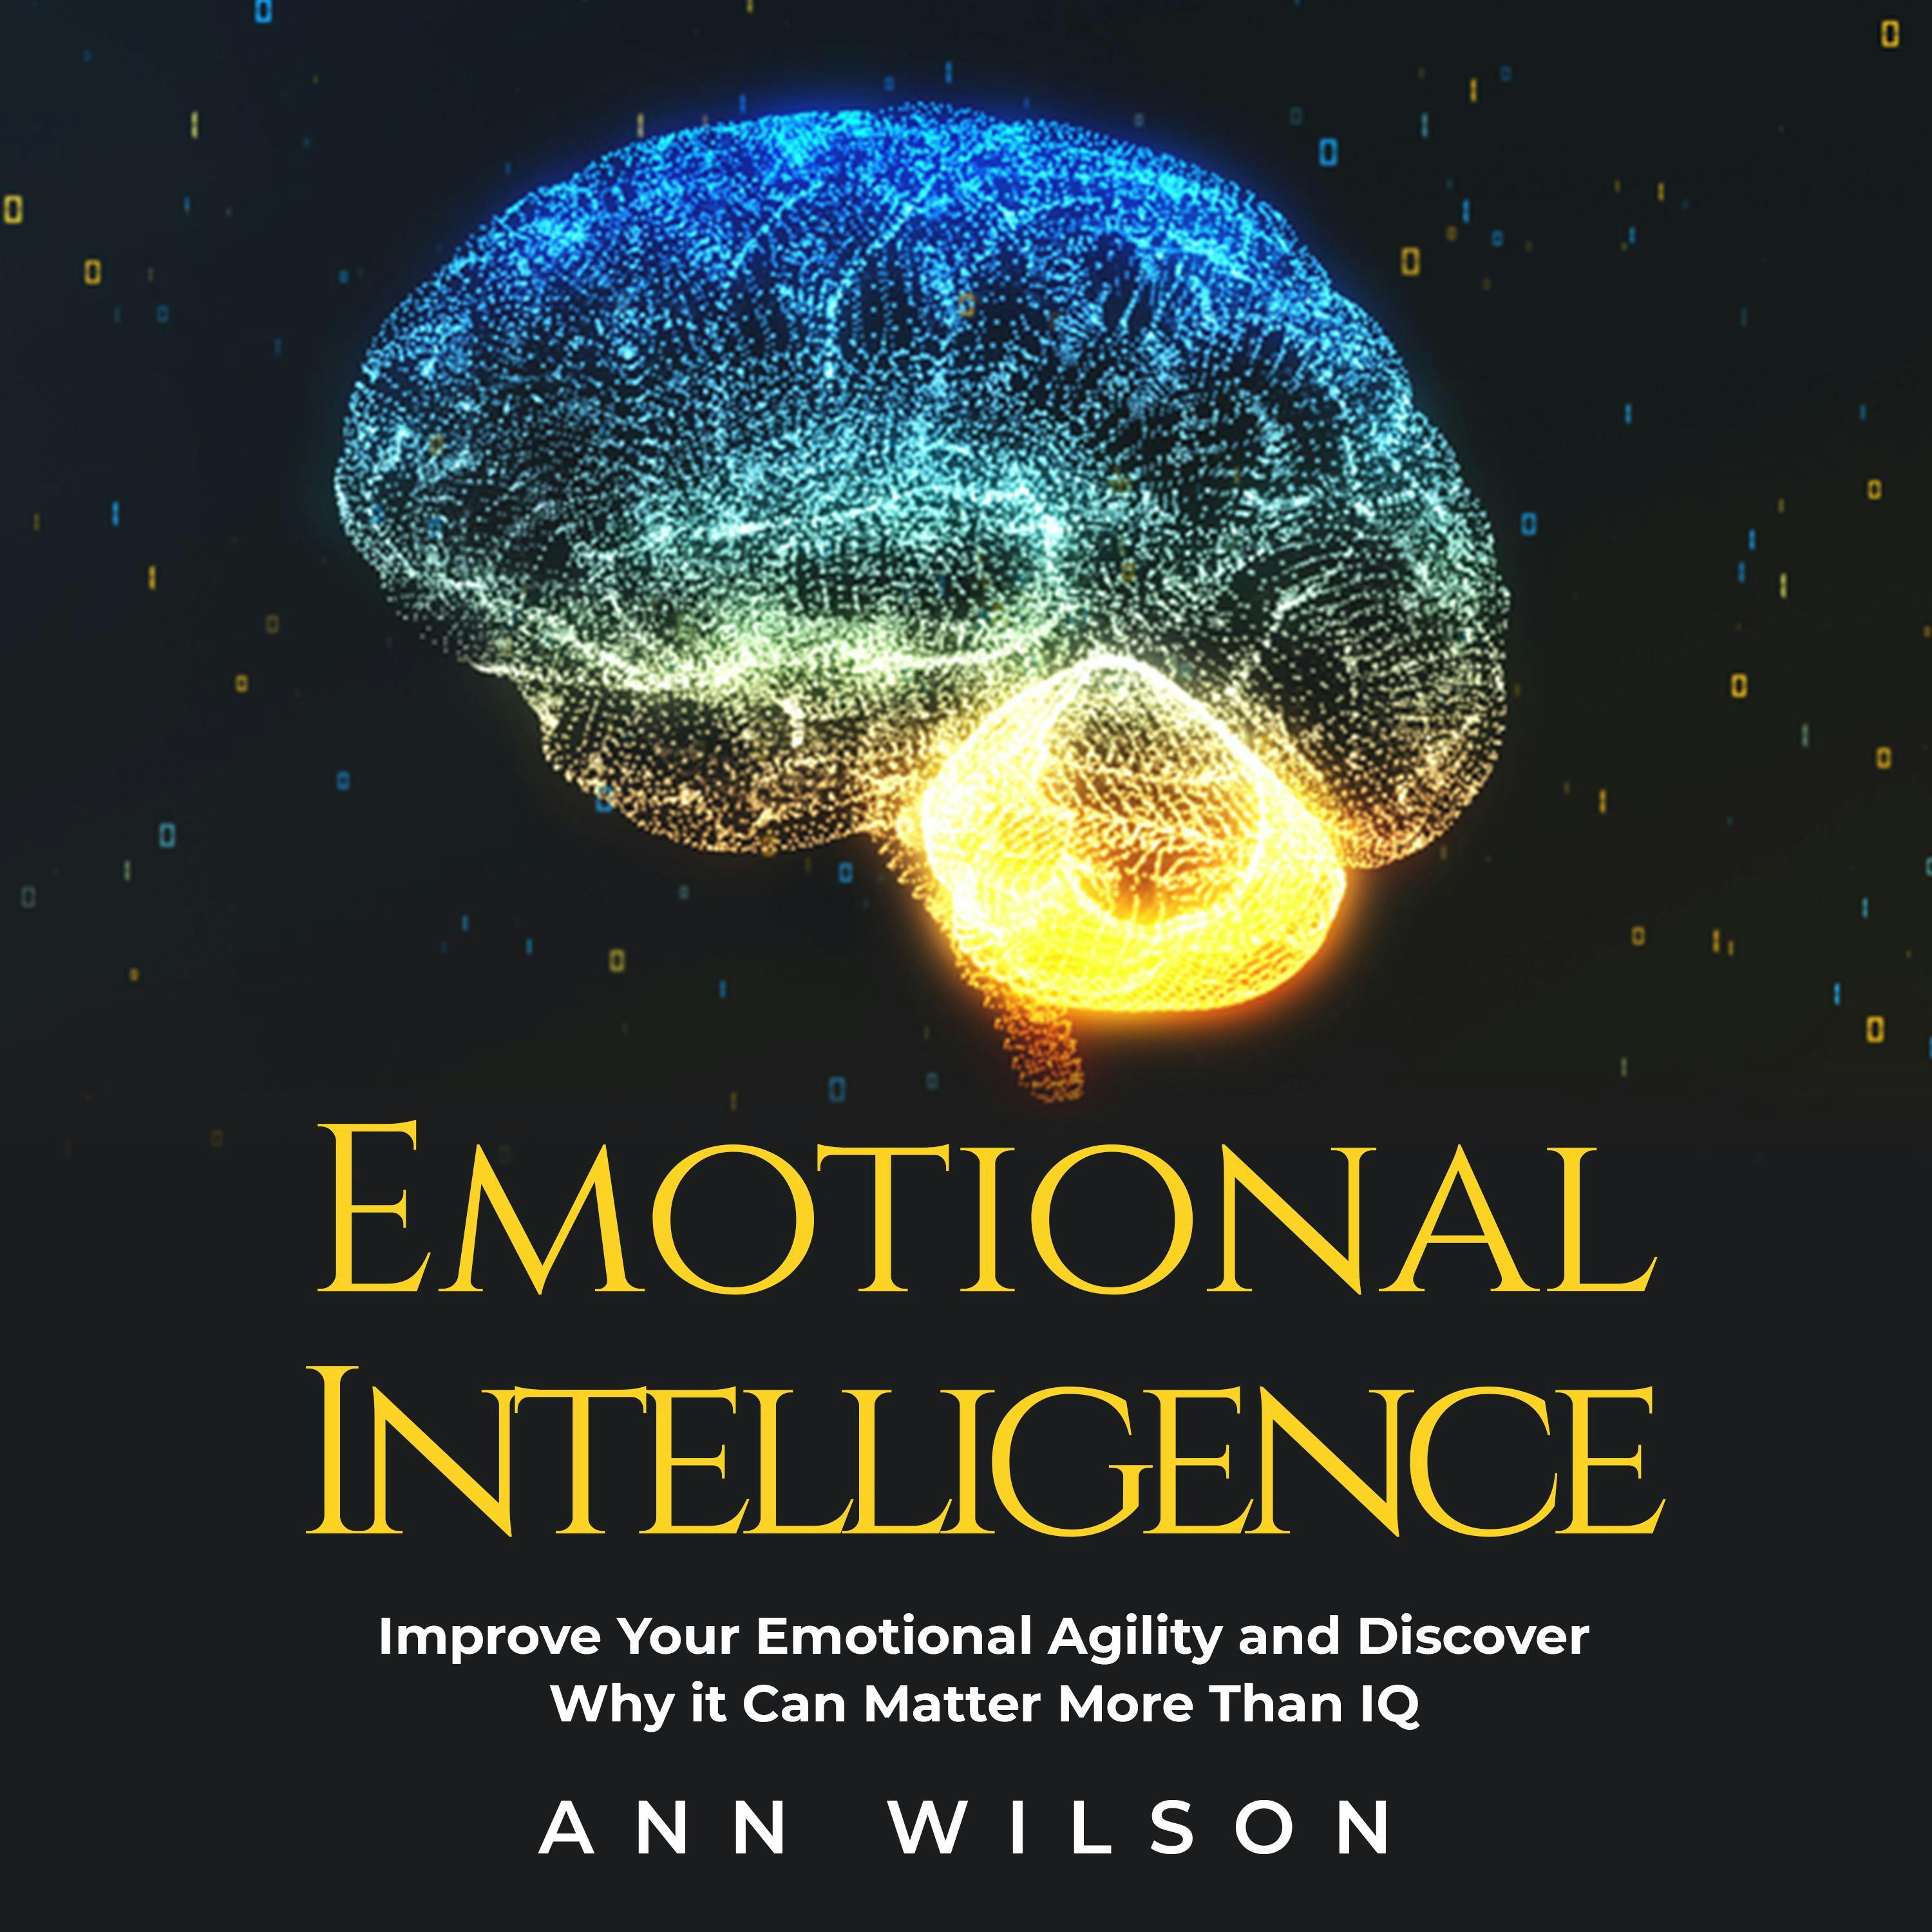 Emotional Intelligence: Improve your Emotional Agility and Discover Why it can Matter More Than IQ - Ann Wilson